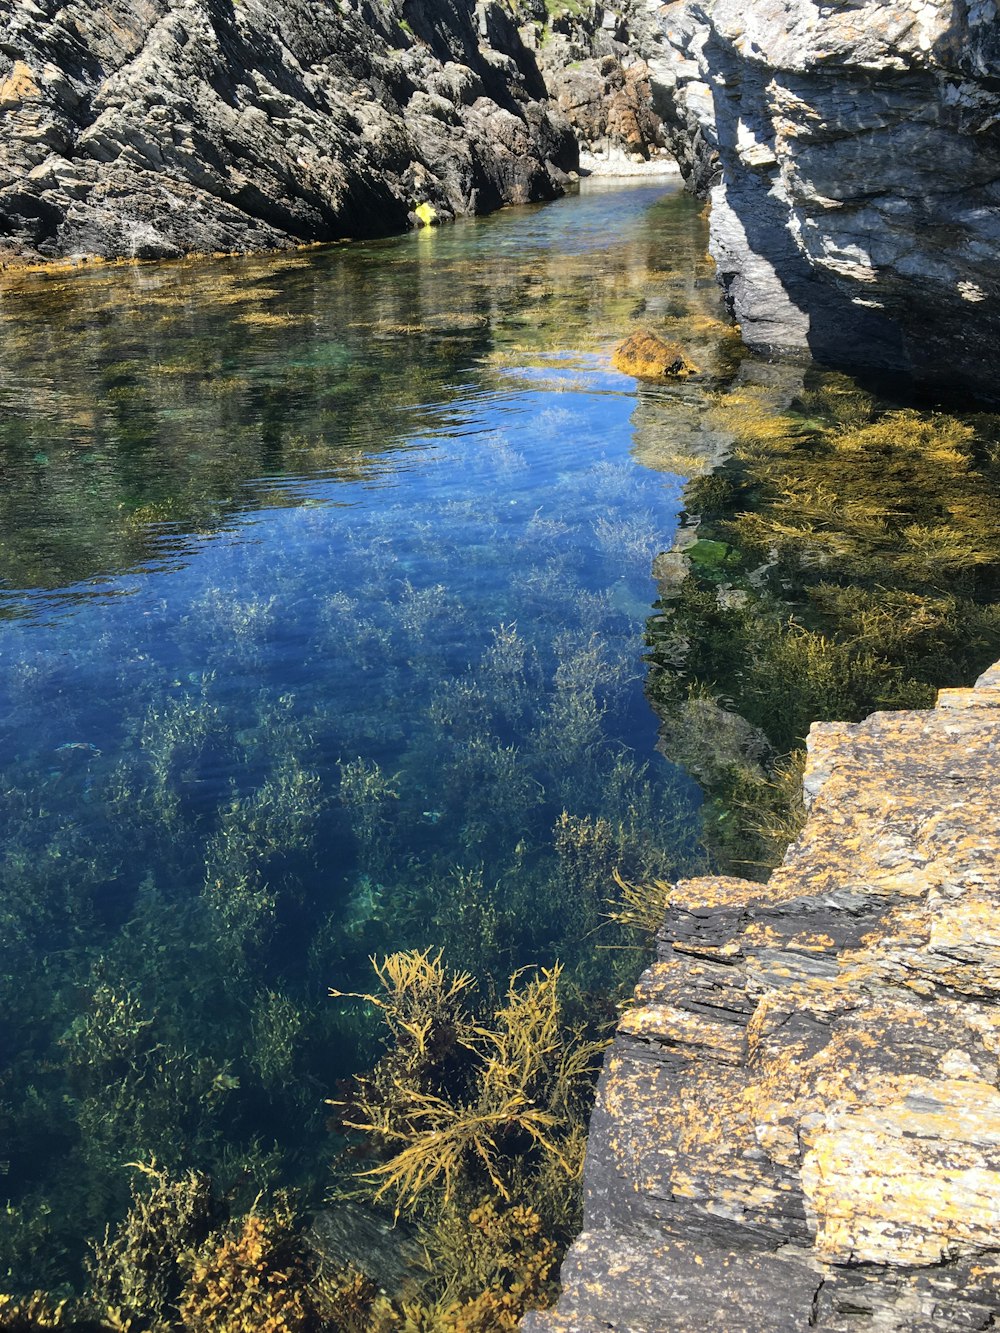 a body of water surrounded by rocks and plants